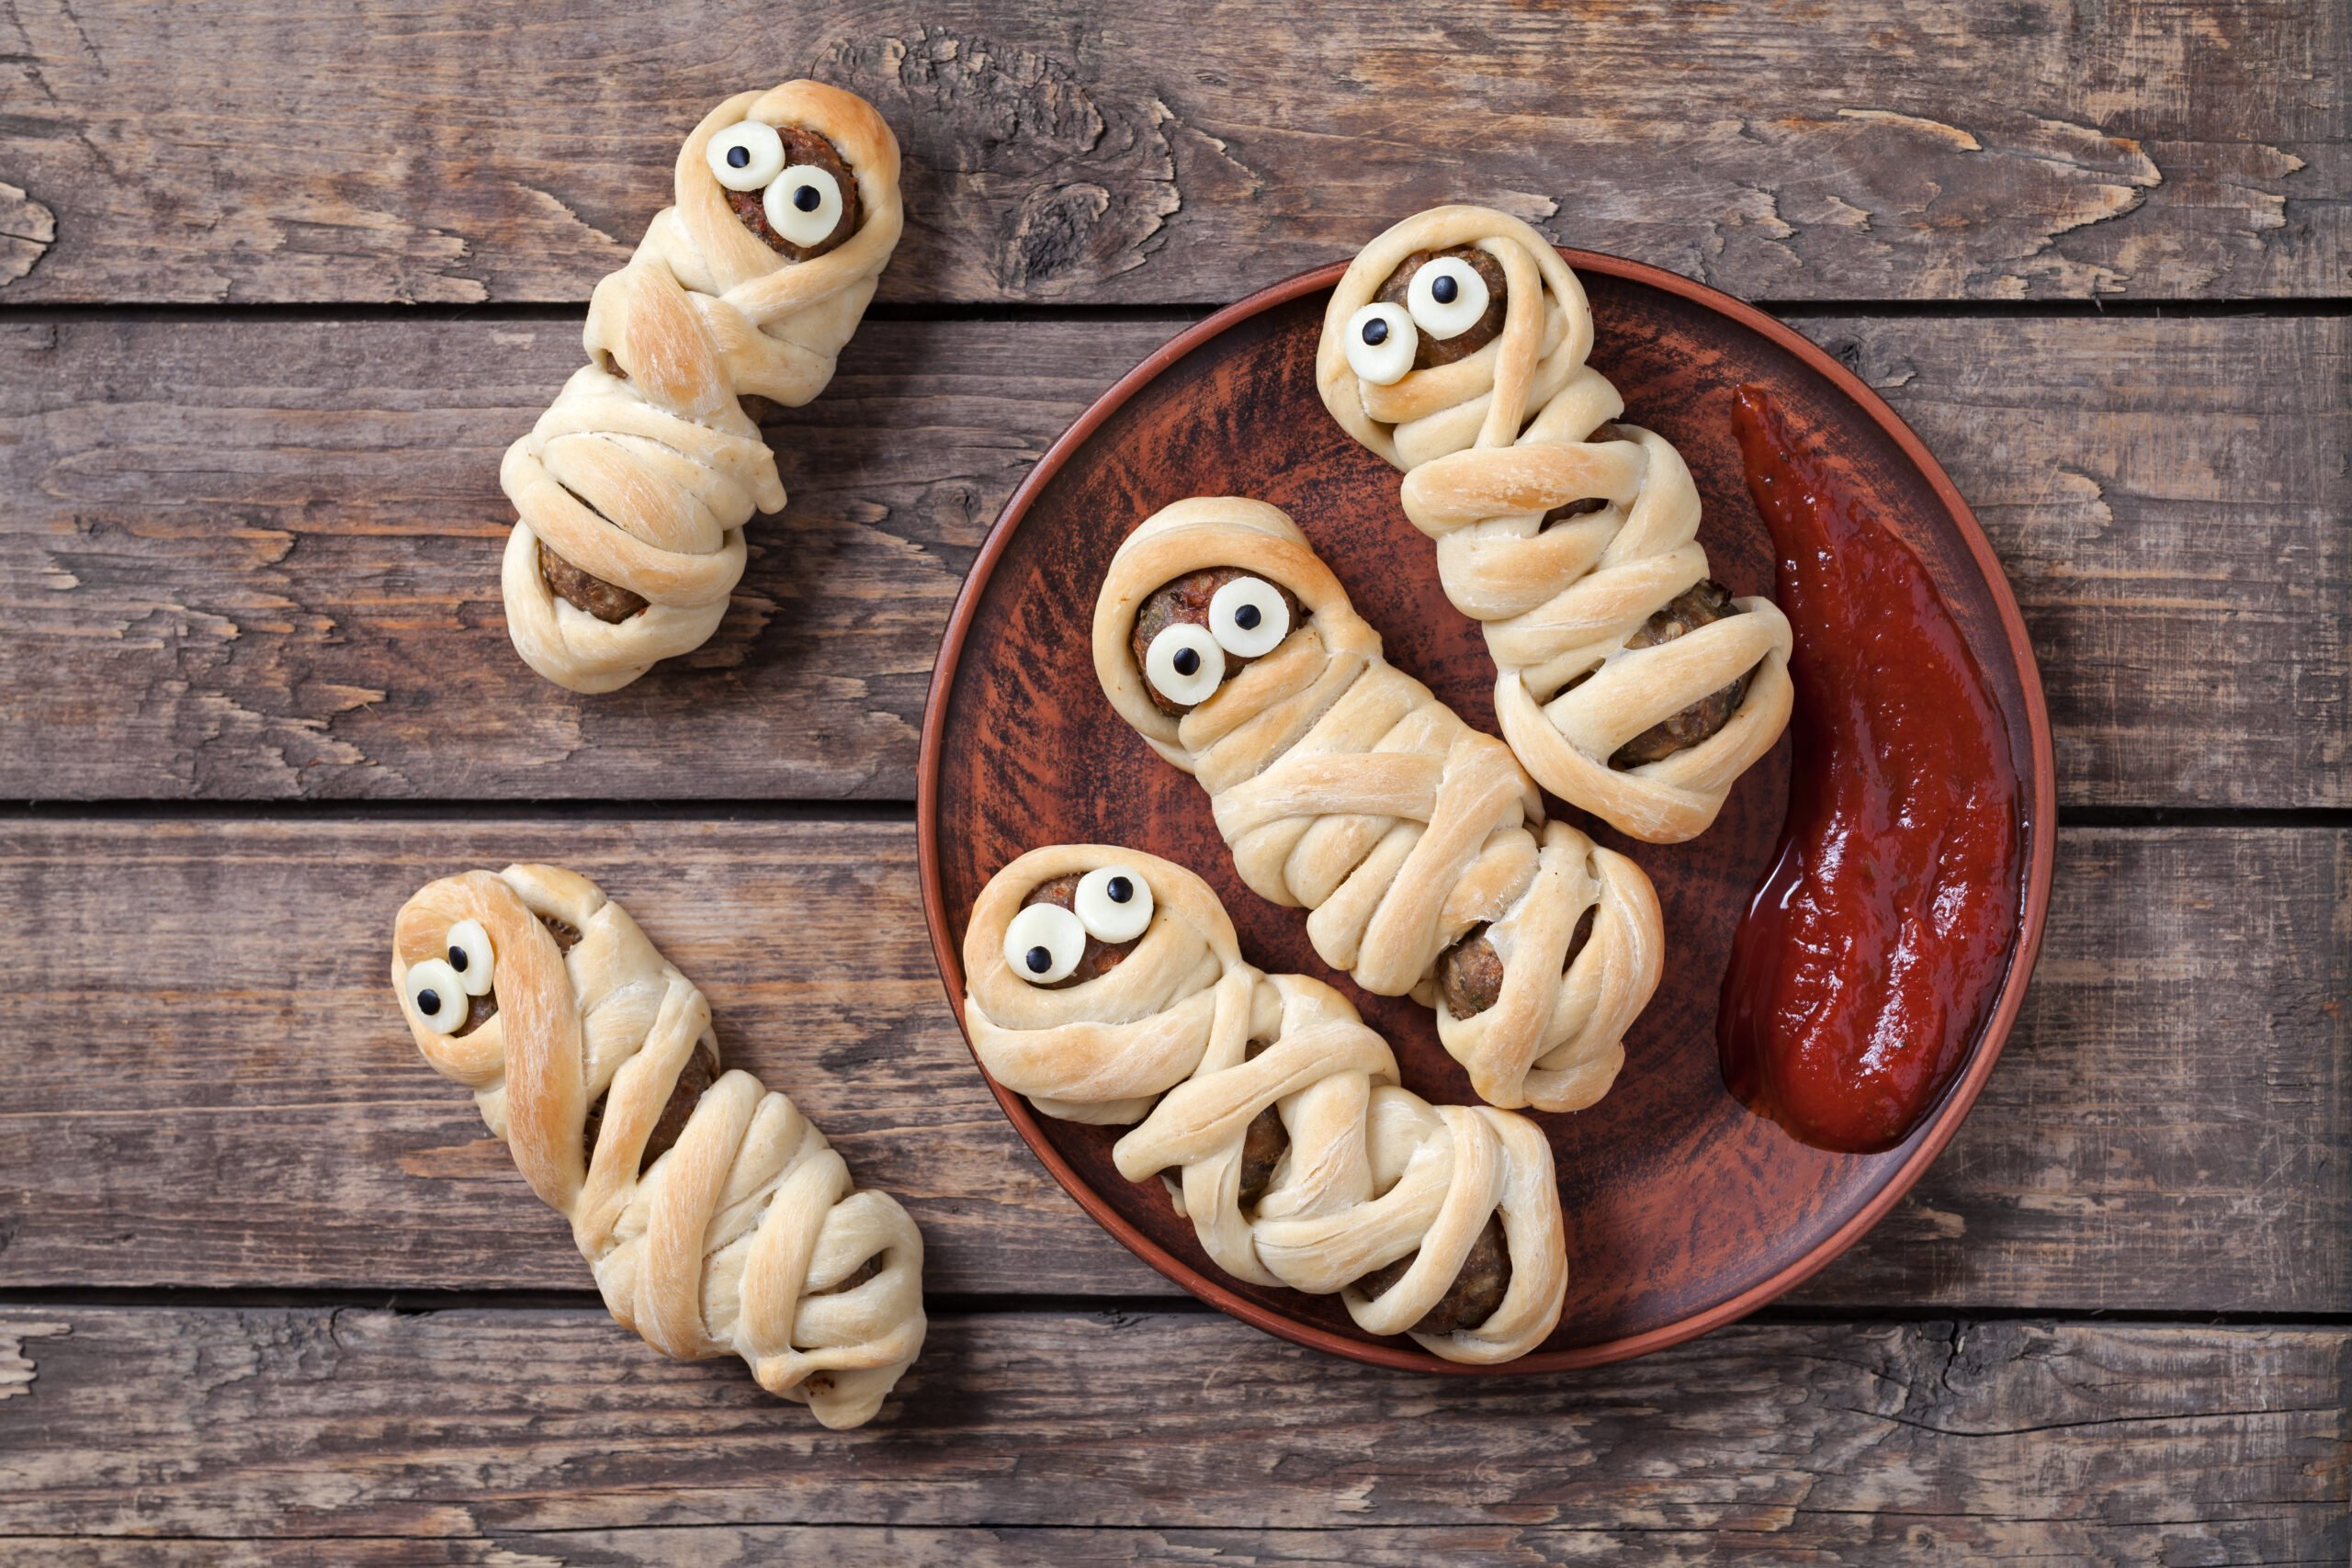 Easy Halloween Hot Dog Mummy Recipe; two ingredient mummy dogs using crescent dough and hot dogs. Easy fun Halloween recipe for kids!